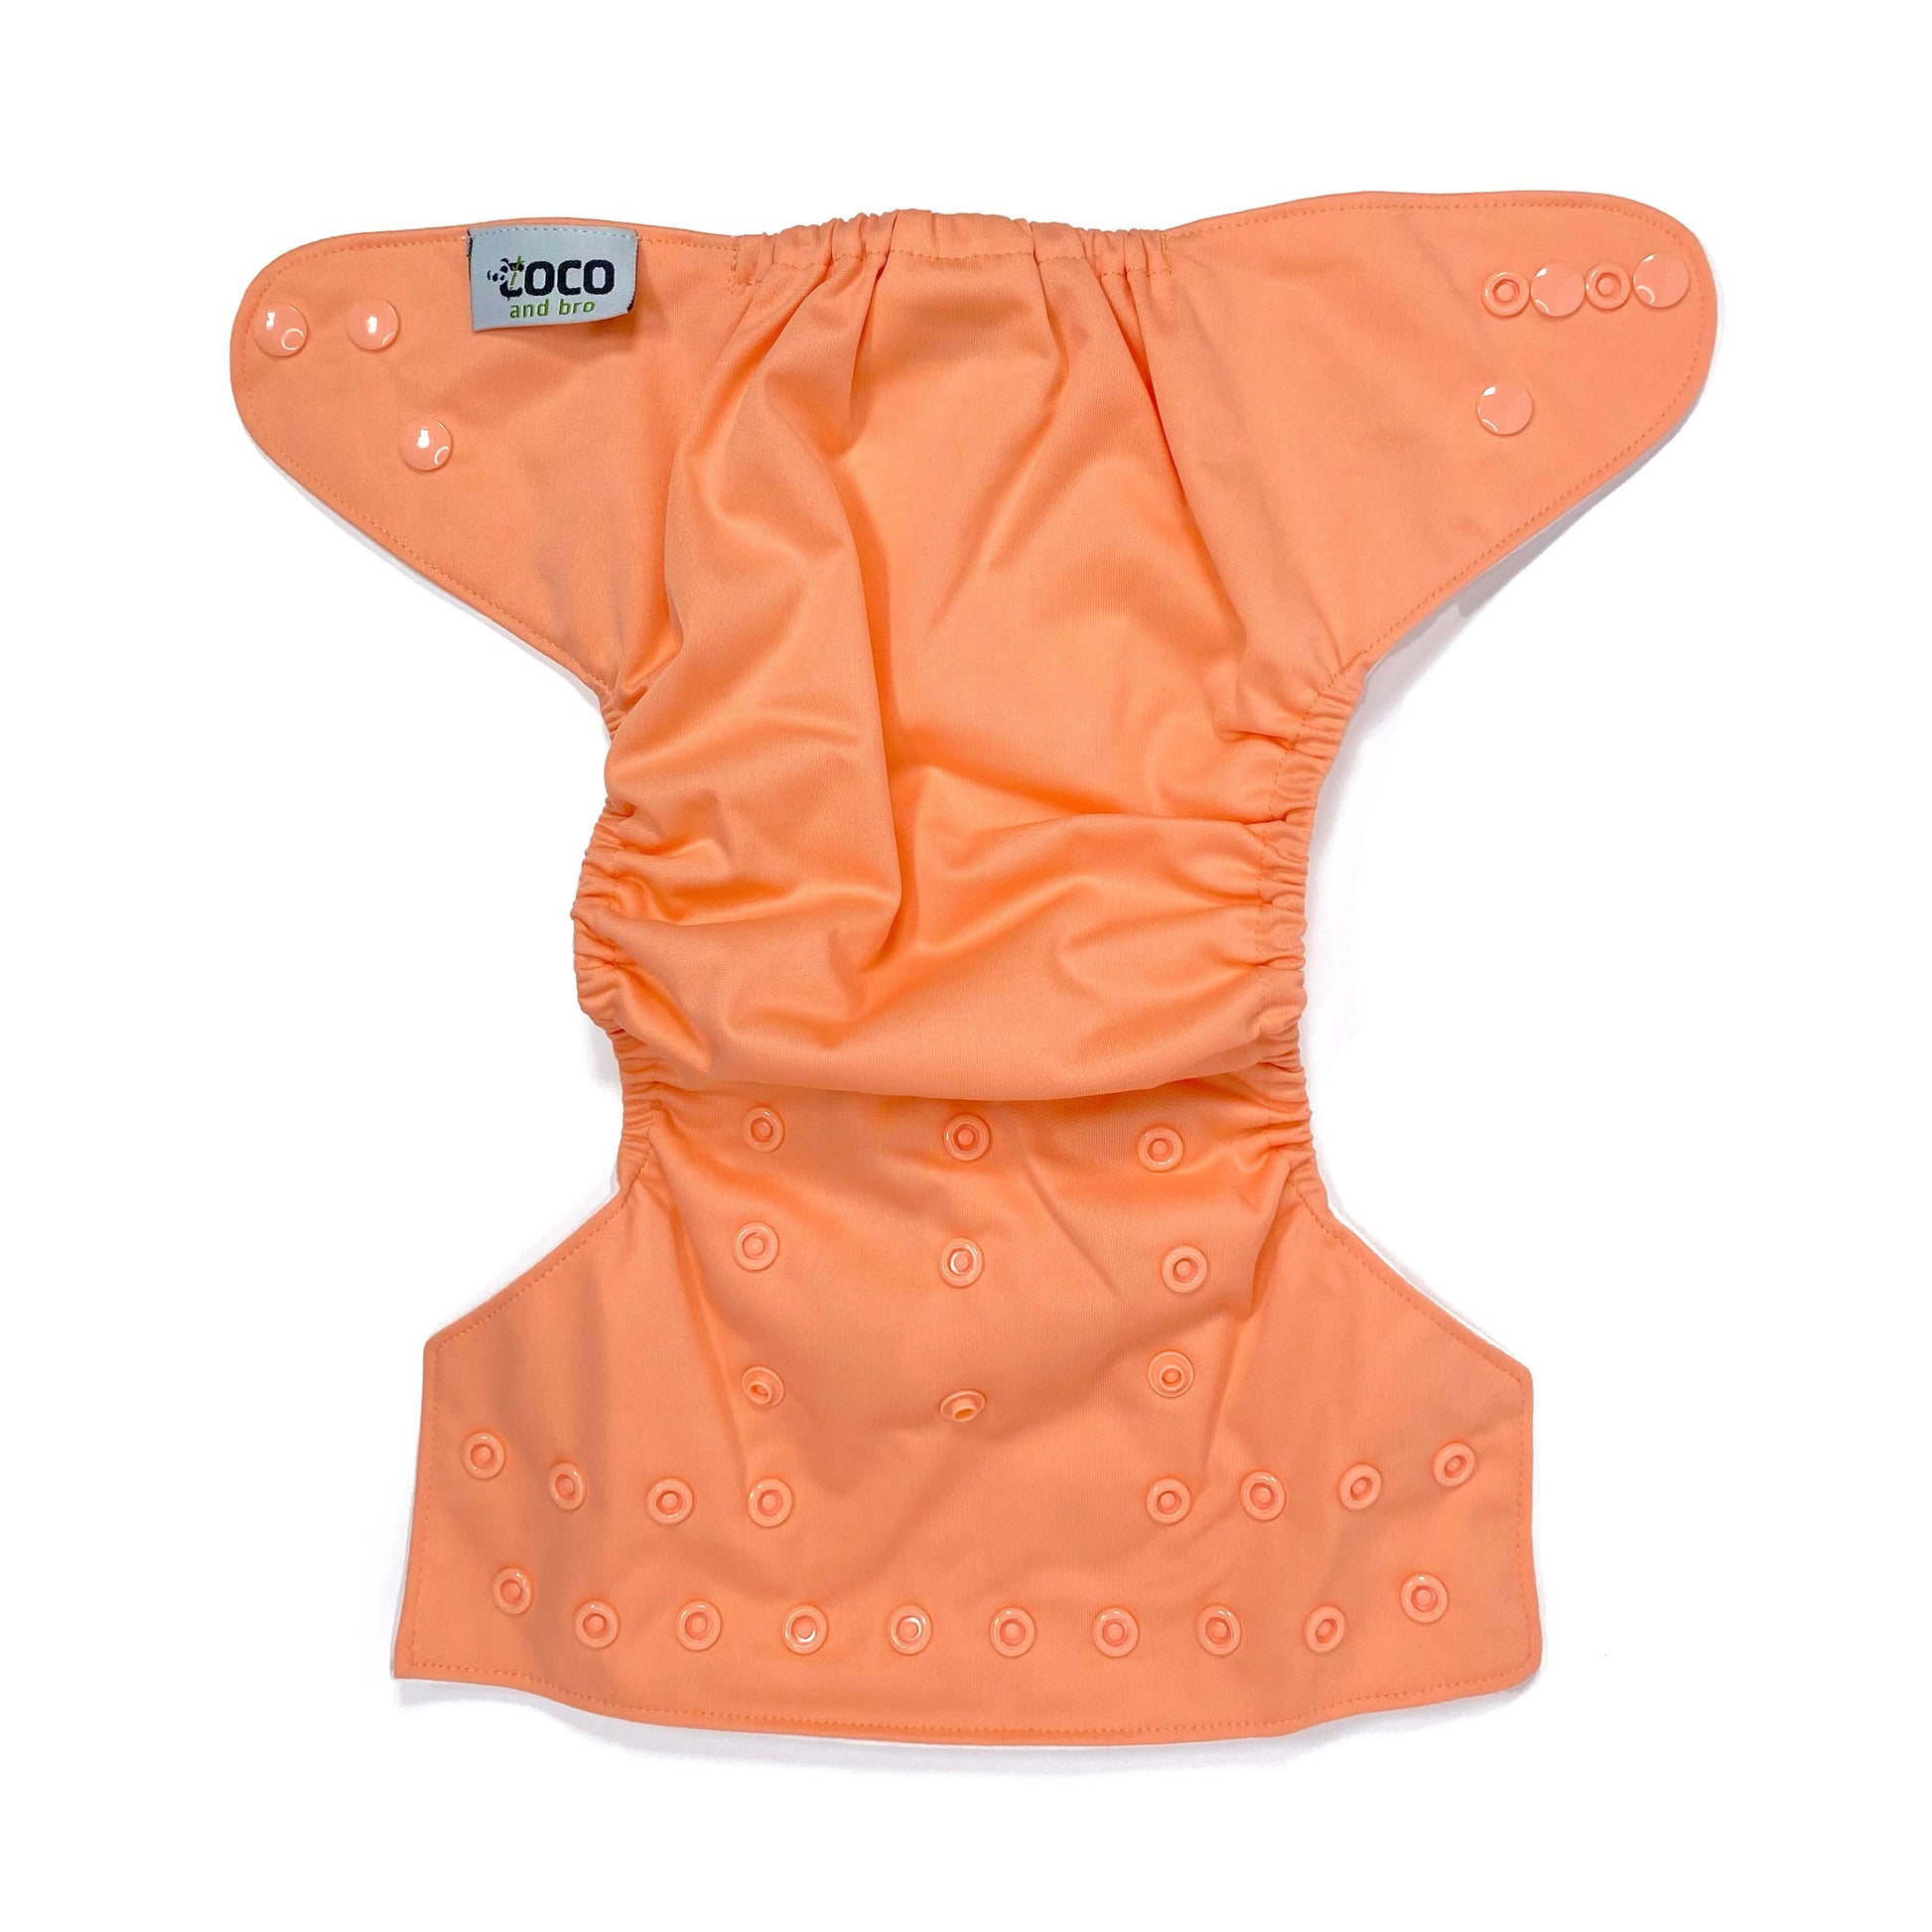 An adjustable reusable nappy for babies and toddlers, in a bright coral colour. View shows the full outside pattern of the nappy, with fastenings open.